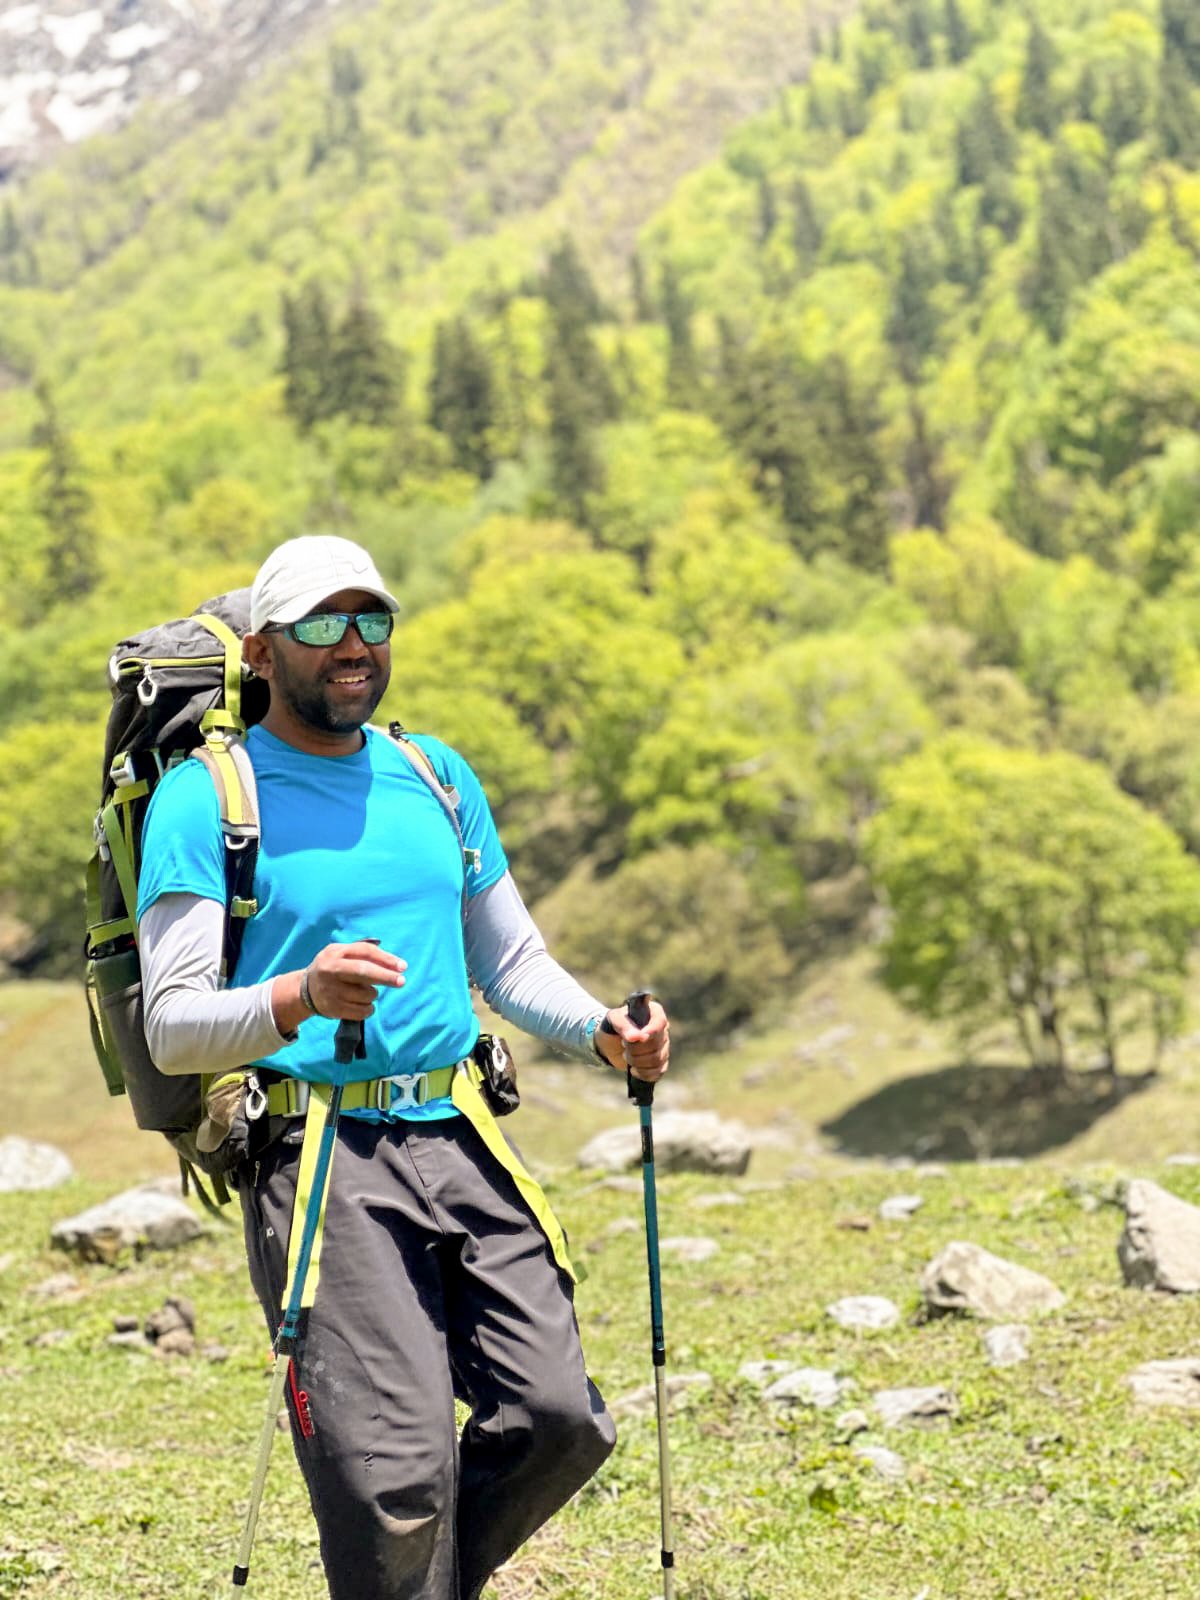 Rency Thomas began his journey on foot at the source of the Ganges in Uttarakhand. Photo: Rency Thomas